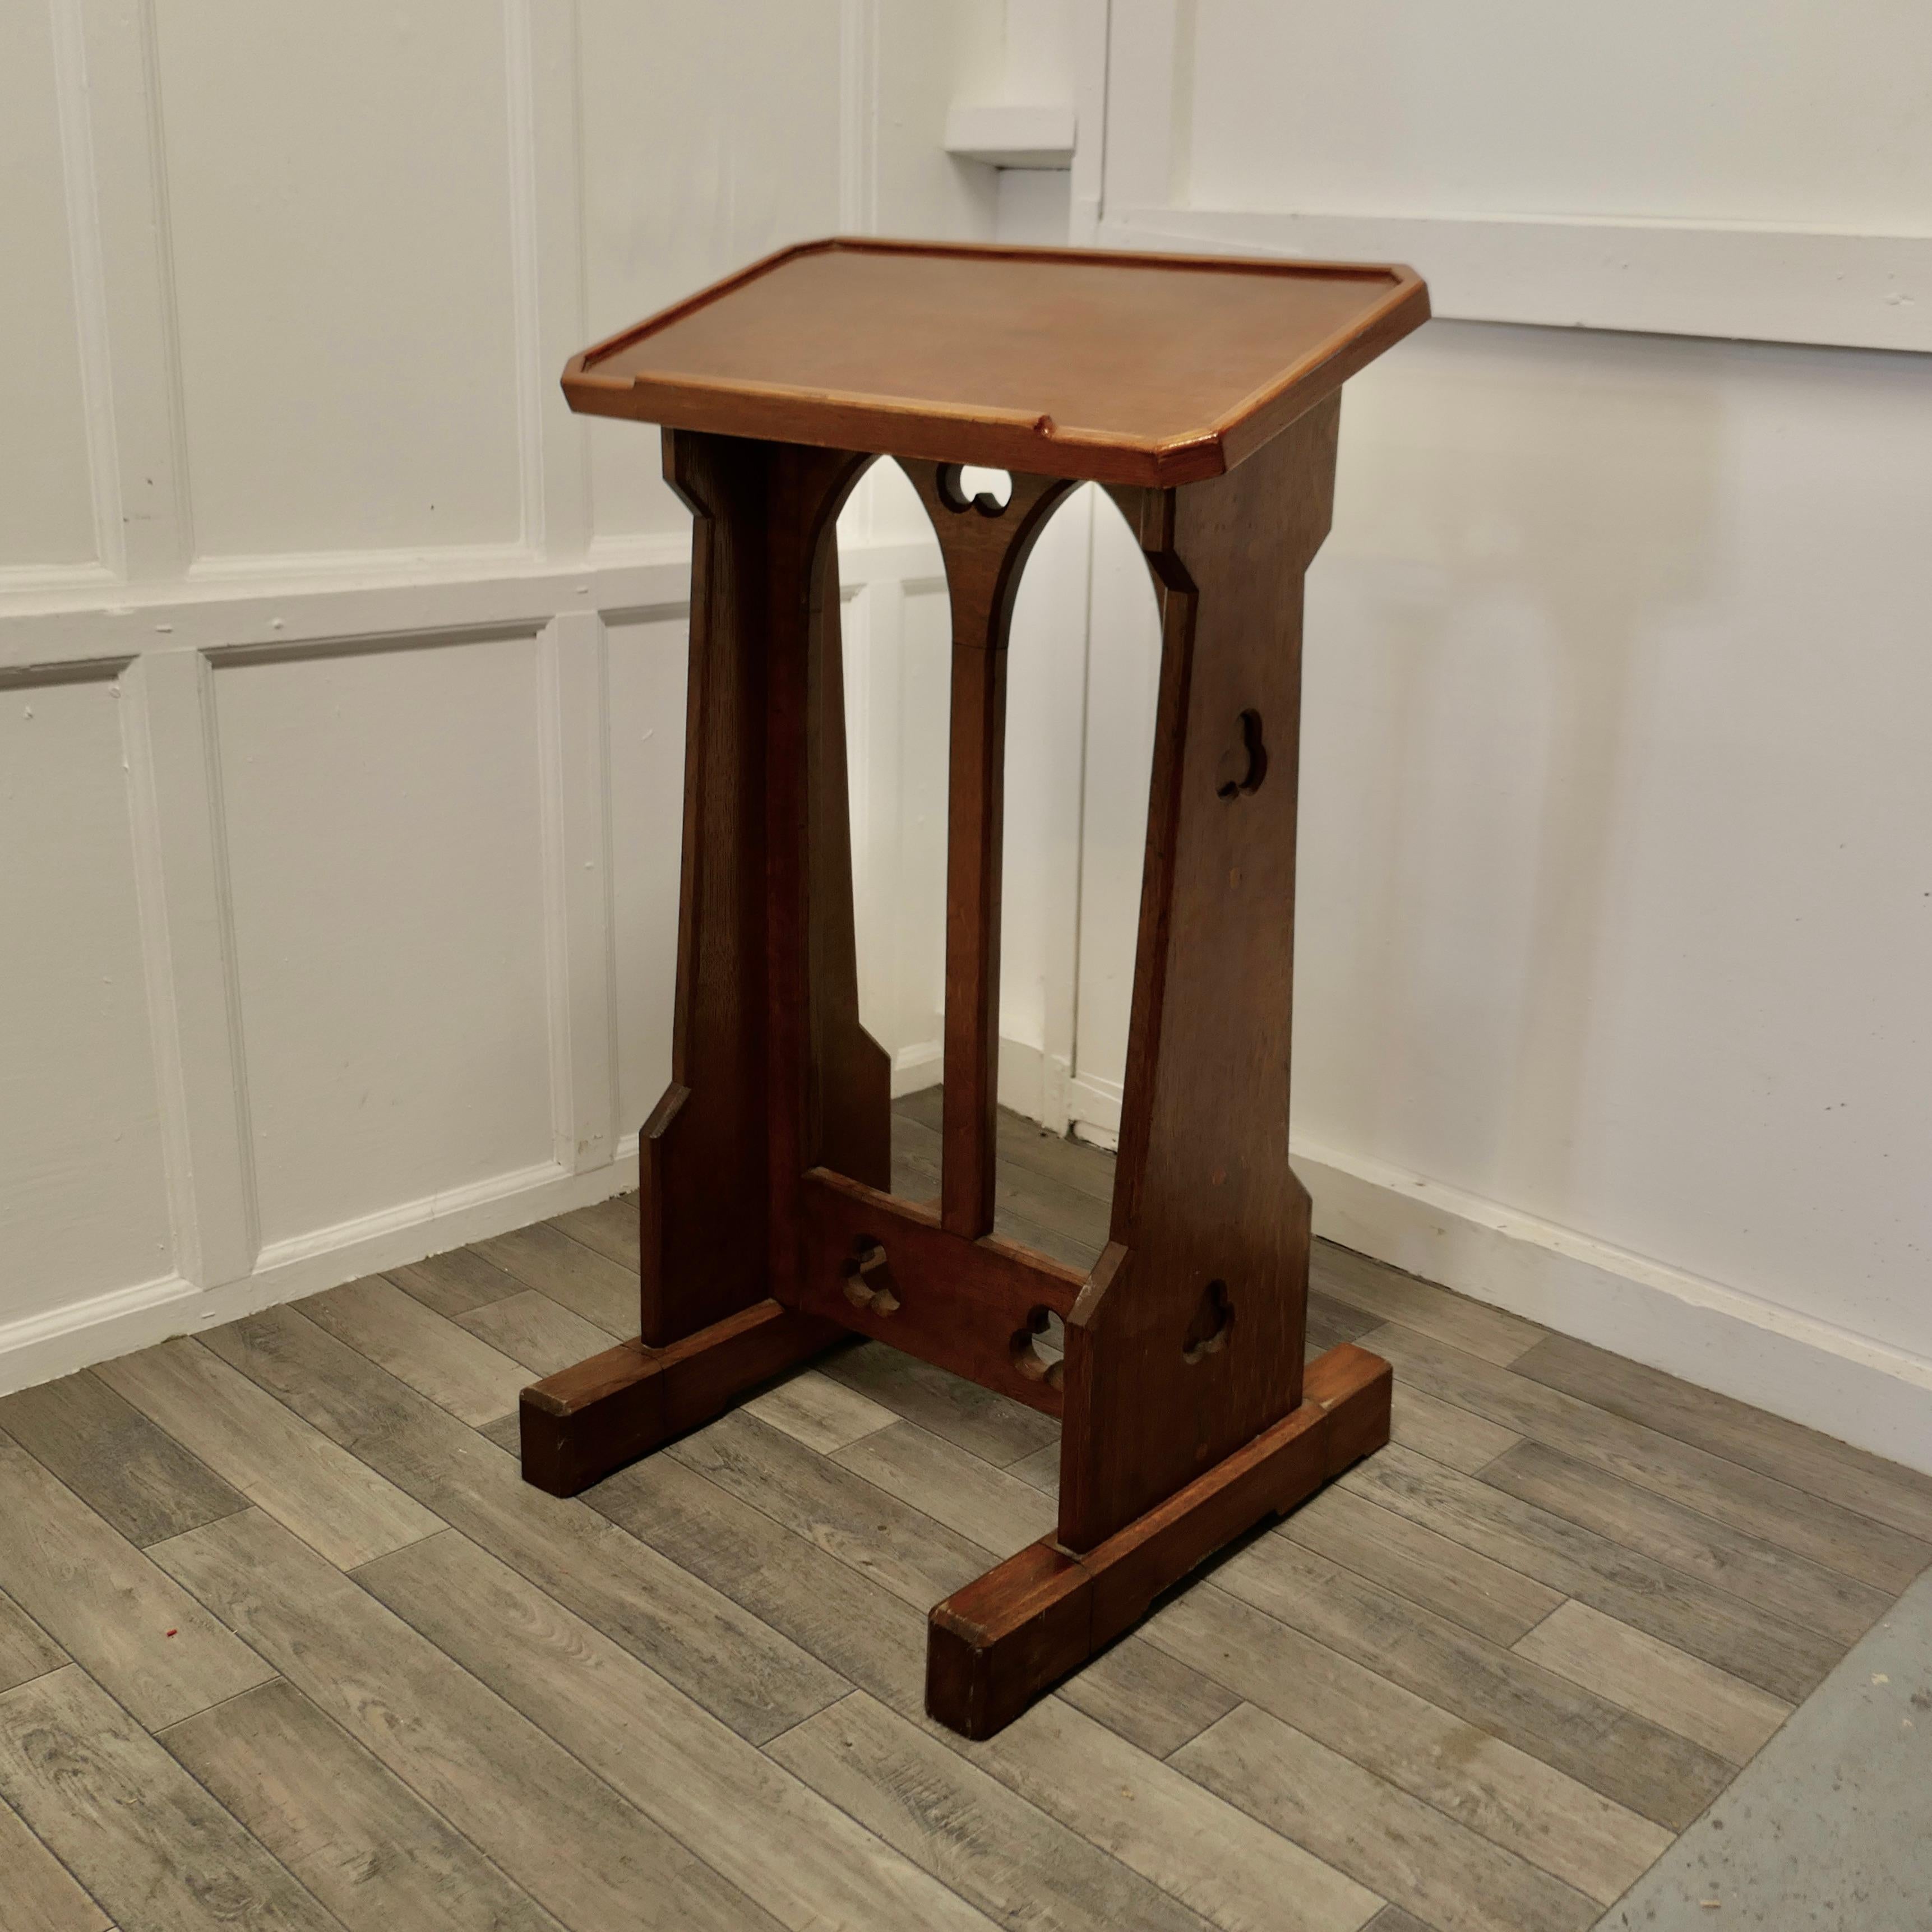 Golden Oak Arts and Crafts restaurant reception greeter 


Golden Oak Arts and Crafts Greeter, the top of the desk has a small gallery around the edge to hold menus etc. in place 

There is a sturdy adjustable height base at the bottom of the